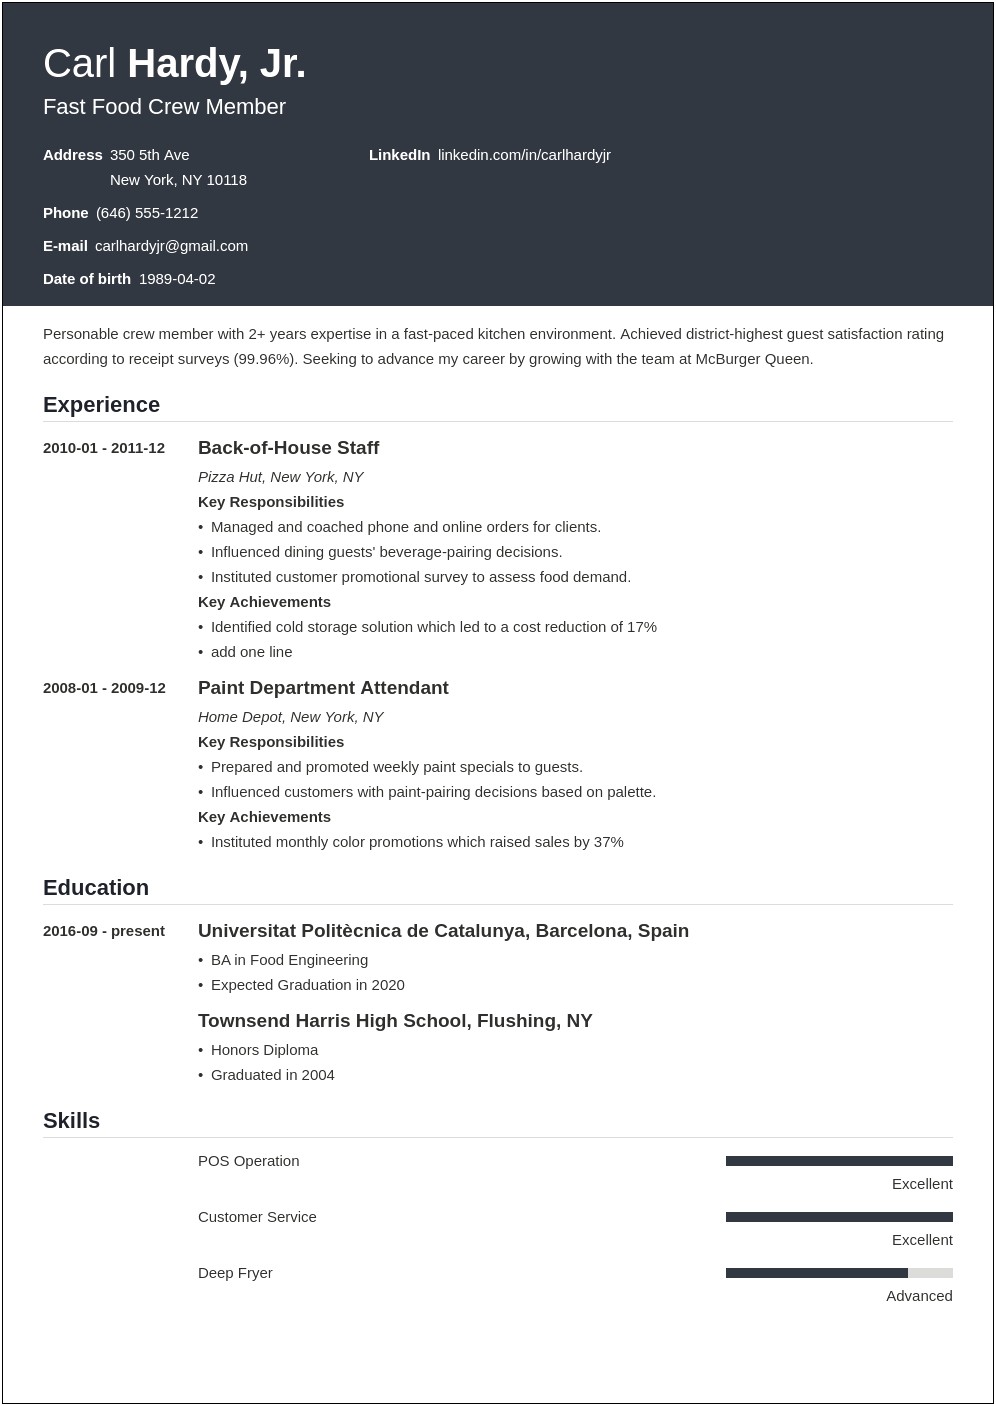 Resume For First Job Fast Food